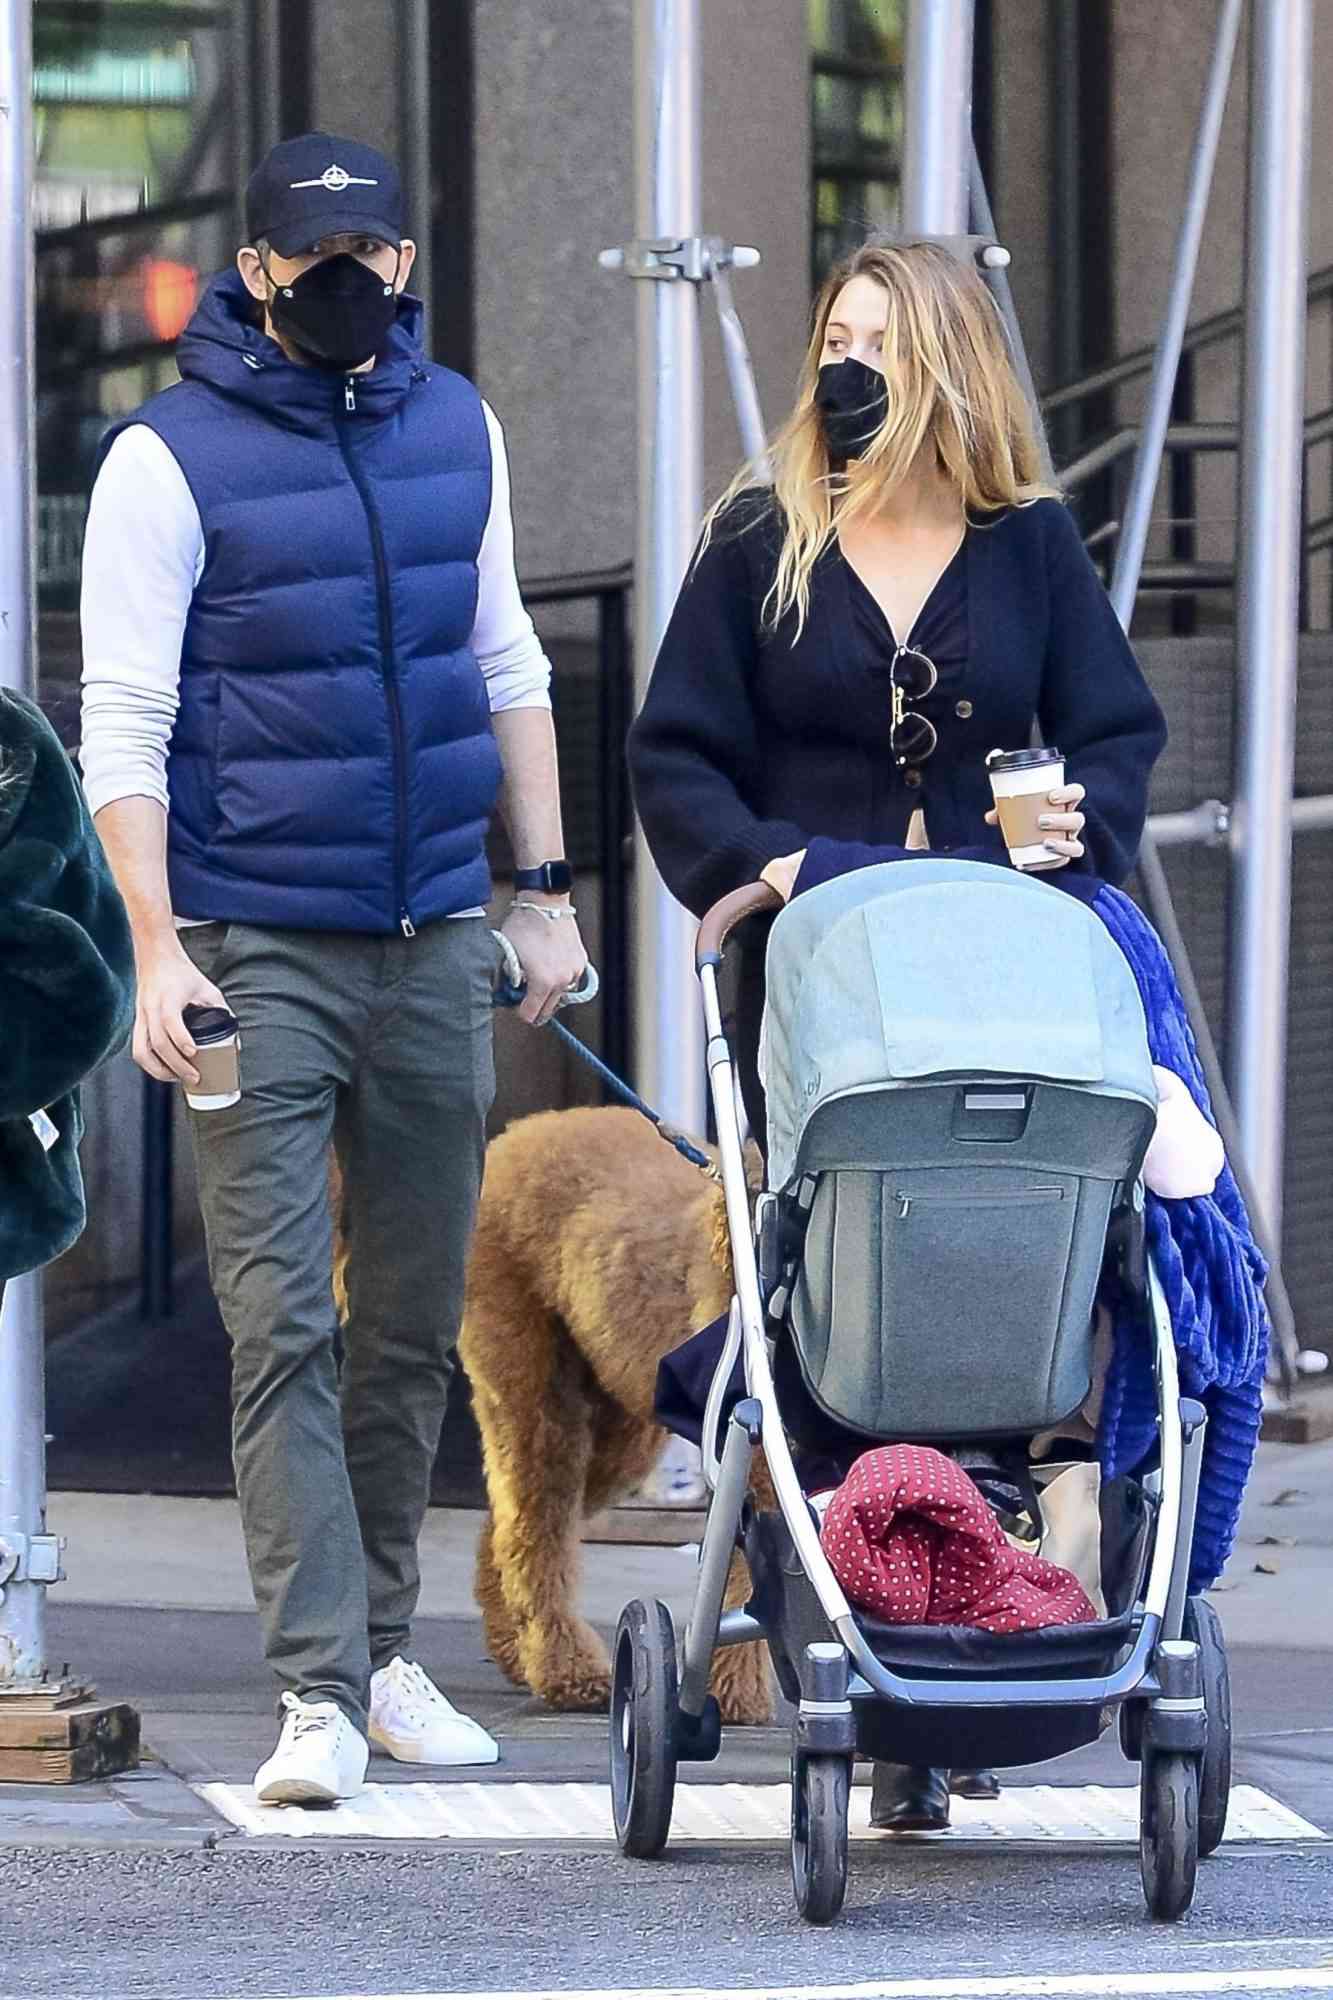 Ryan Reynolds and Blake Lively Enjoy a Coffee Run with their Dog in NYC